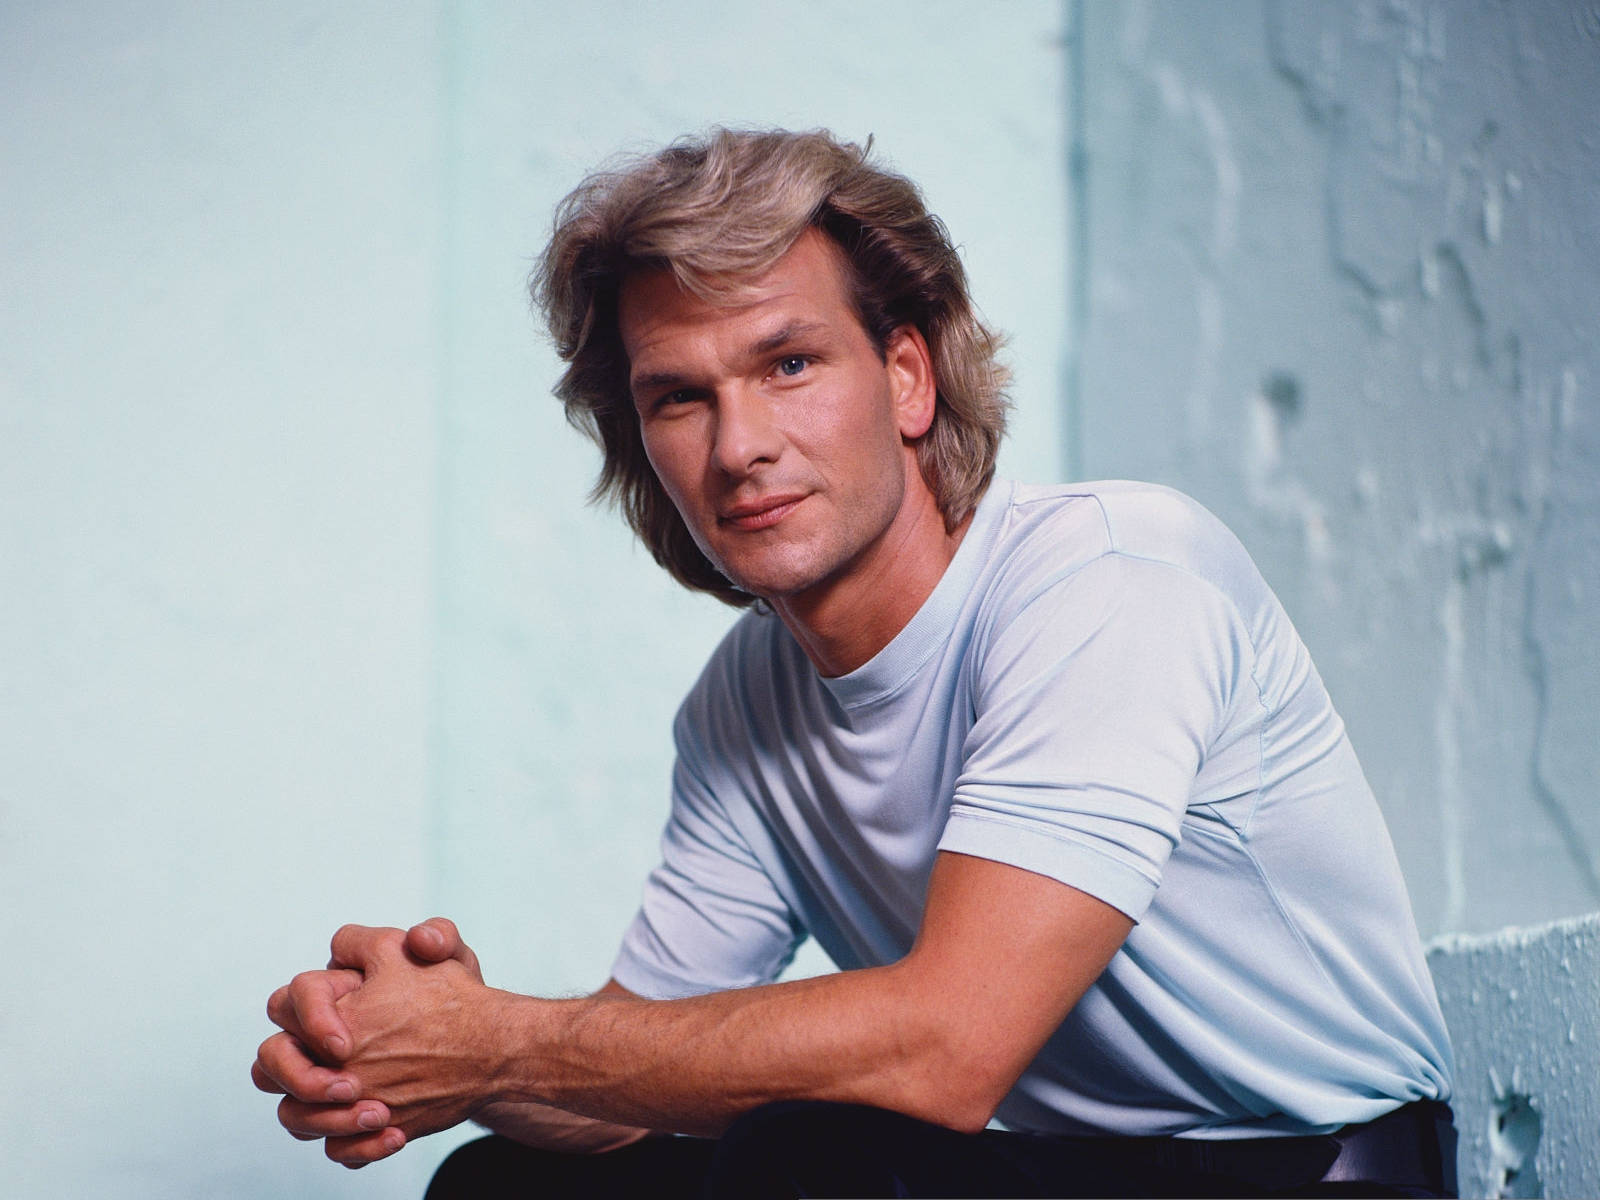 Young Patrick Swayze Blond Hair Wallpaper